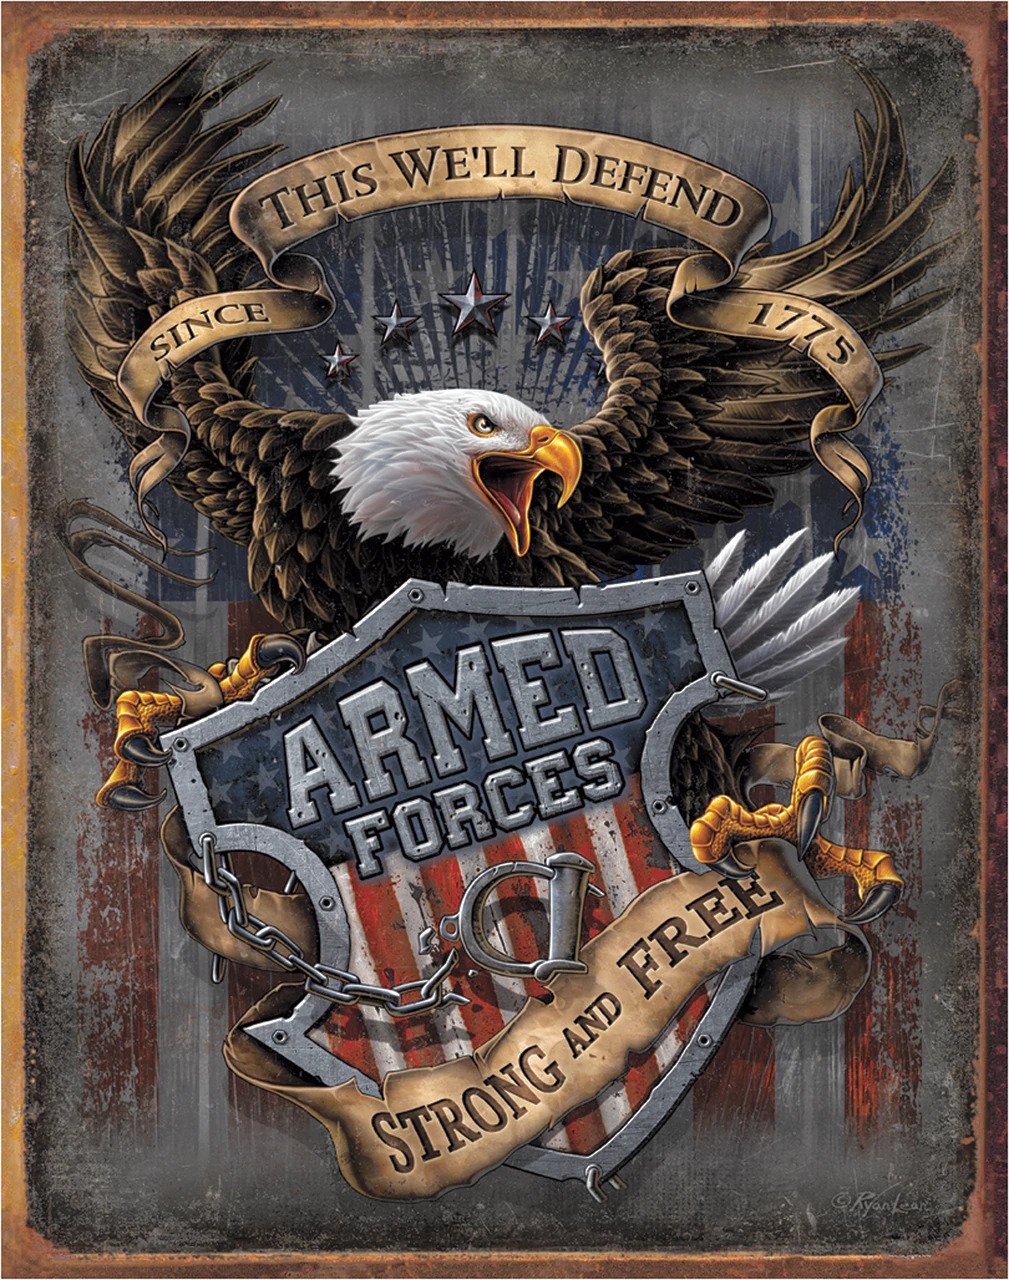 Armed Forces - since 1775 Metal Tin Sign - 2149